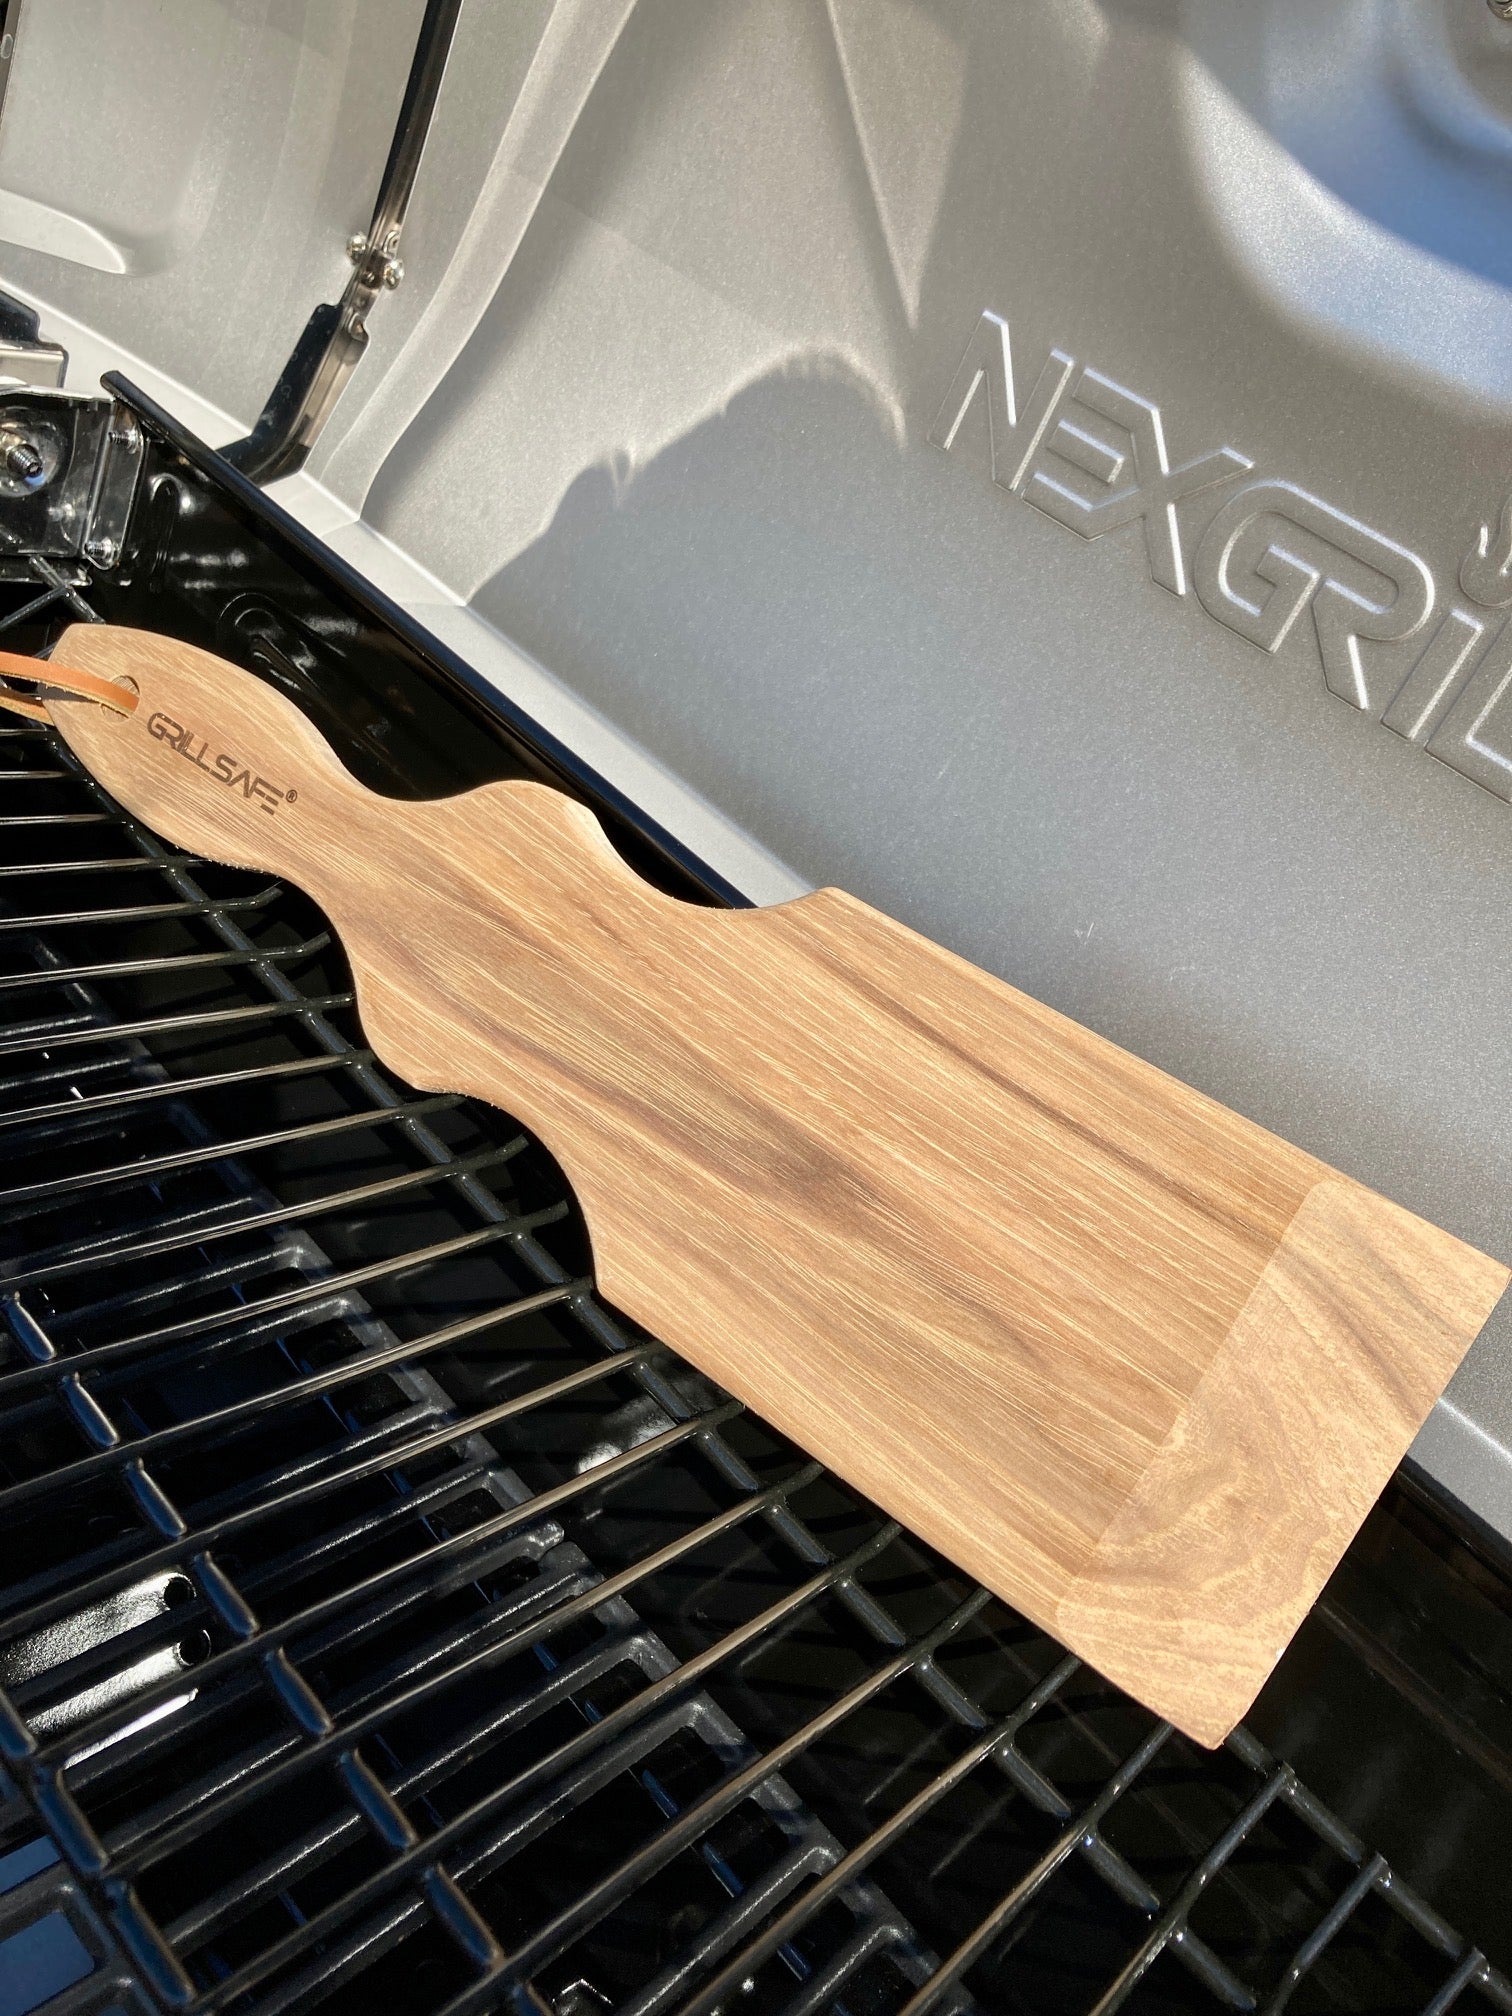 Safe & Natural Wooden Grill Grate Scraper-By Grill Parts For Less